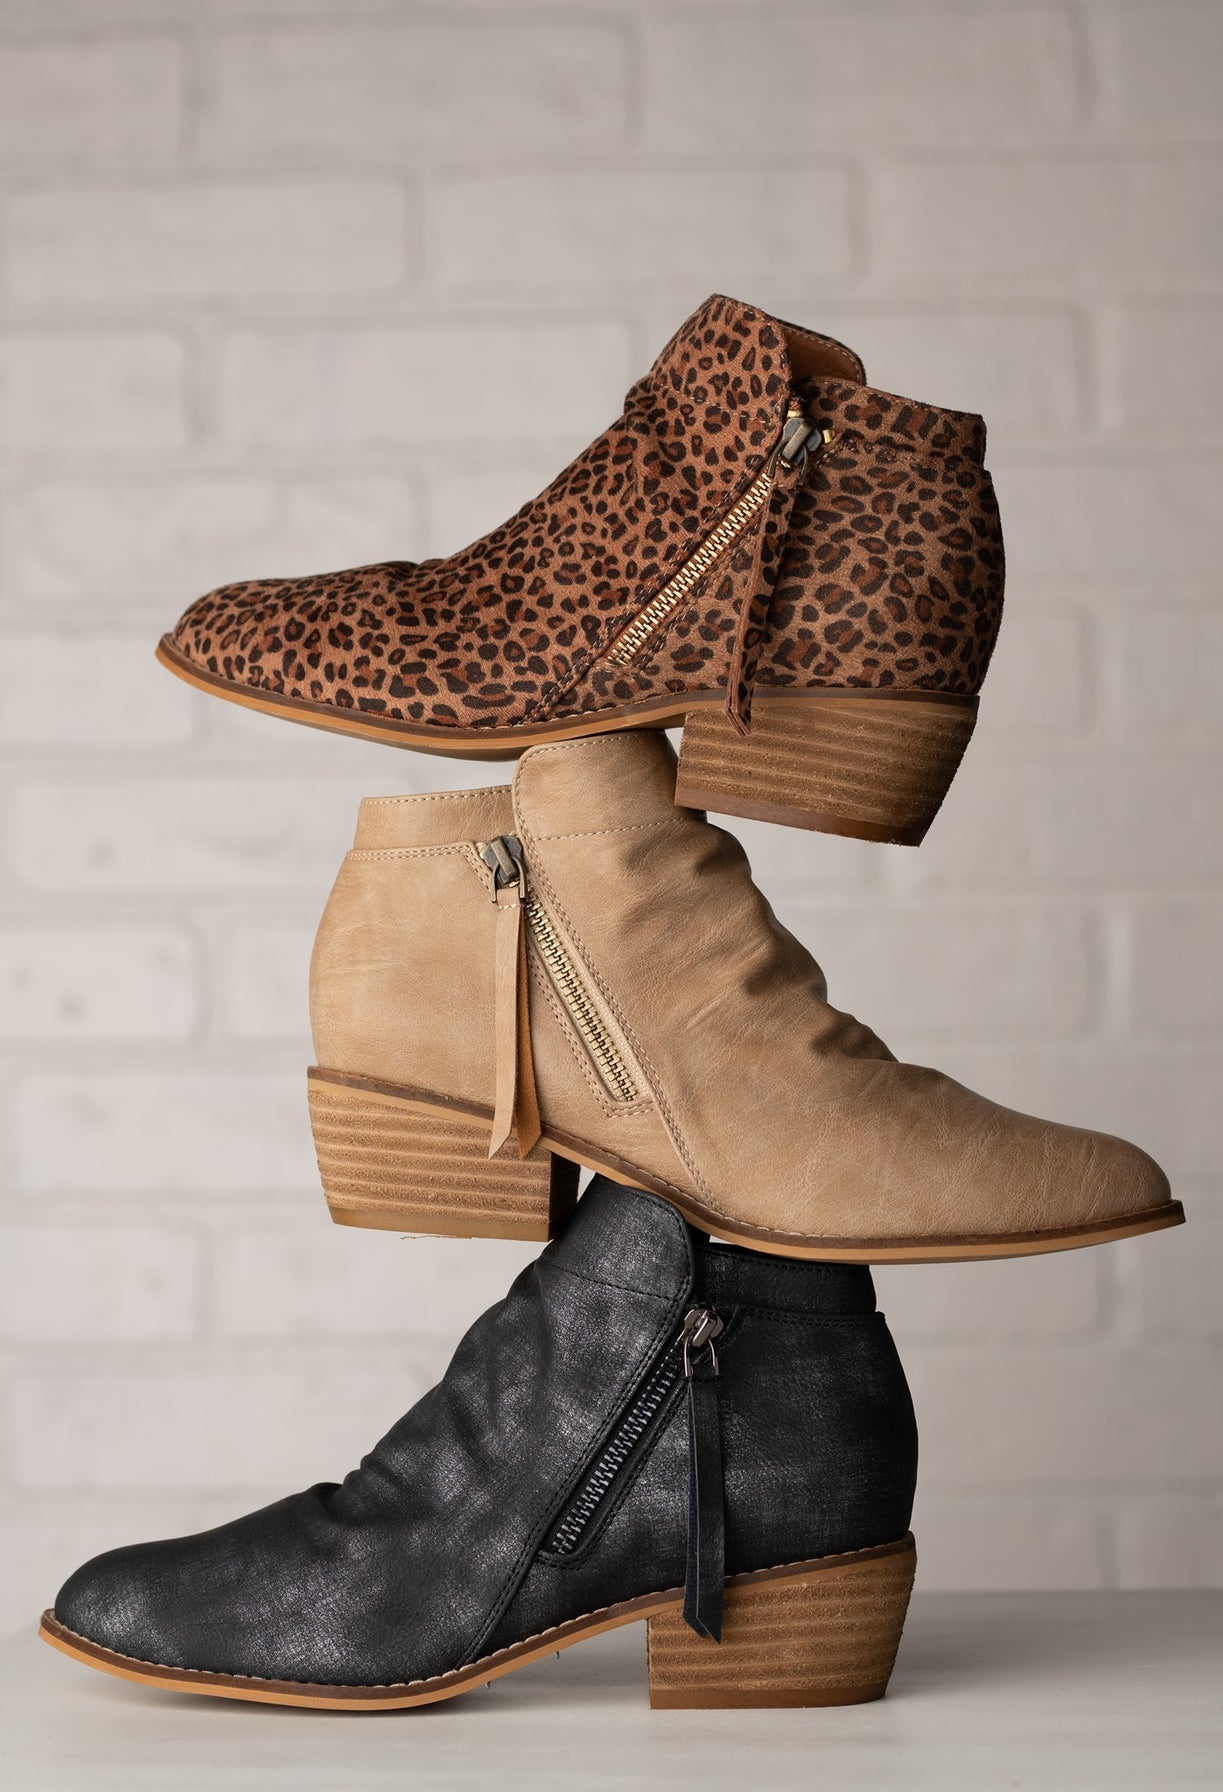 Butternut Boots - Taupe